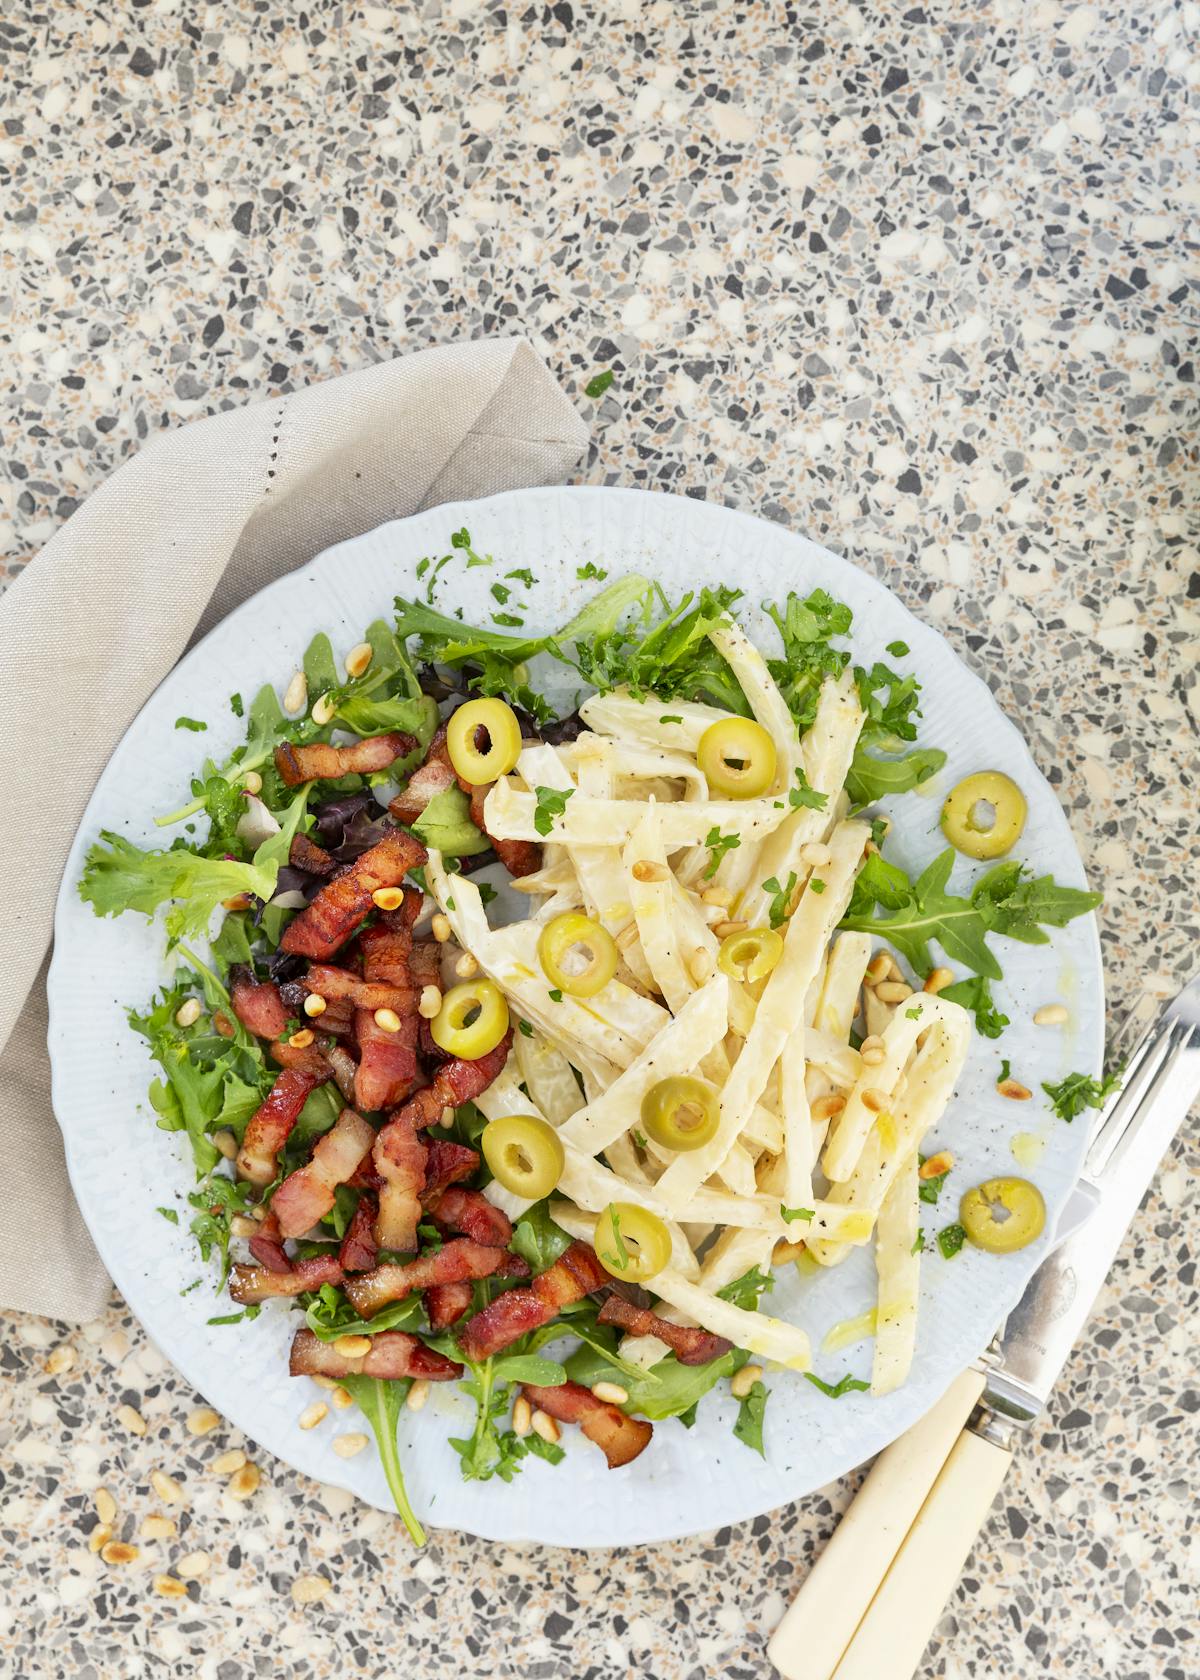 Celery root salad with crispy bacon